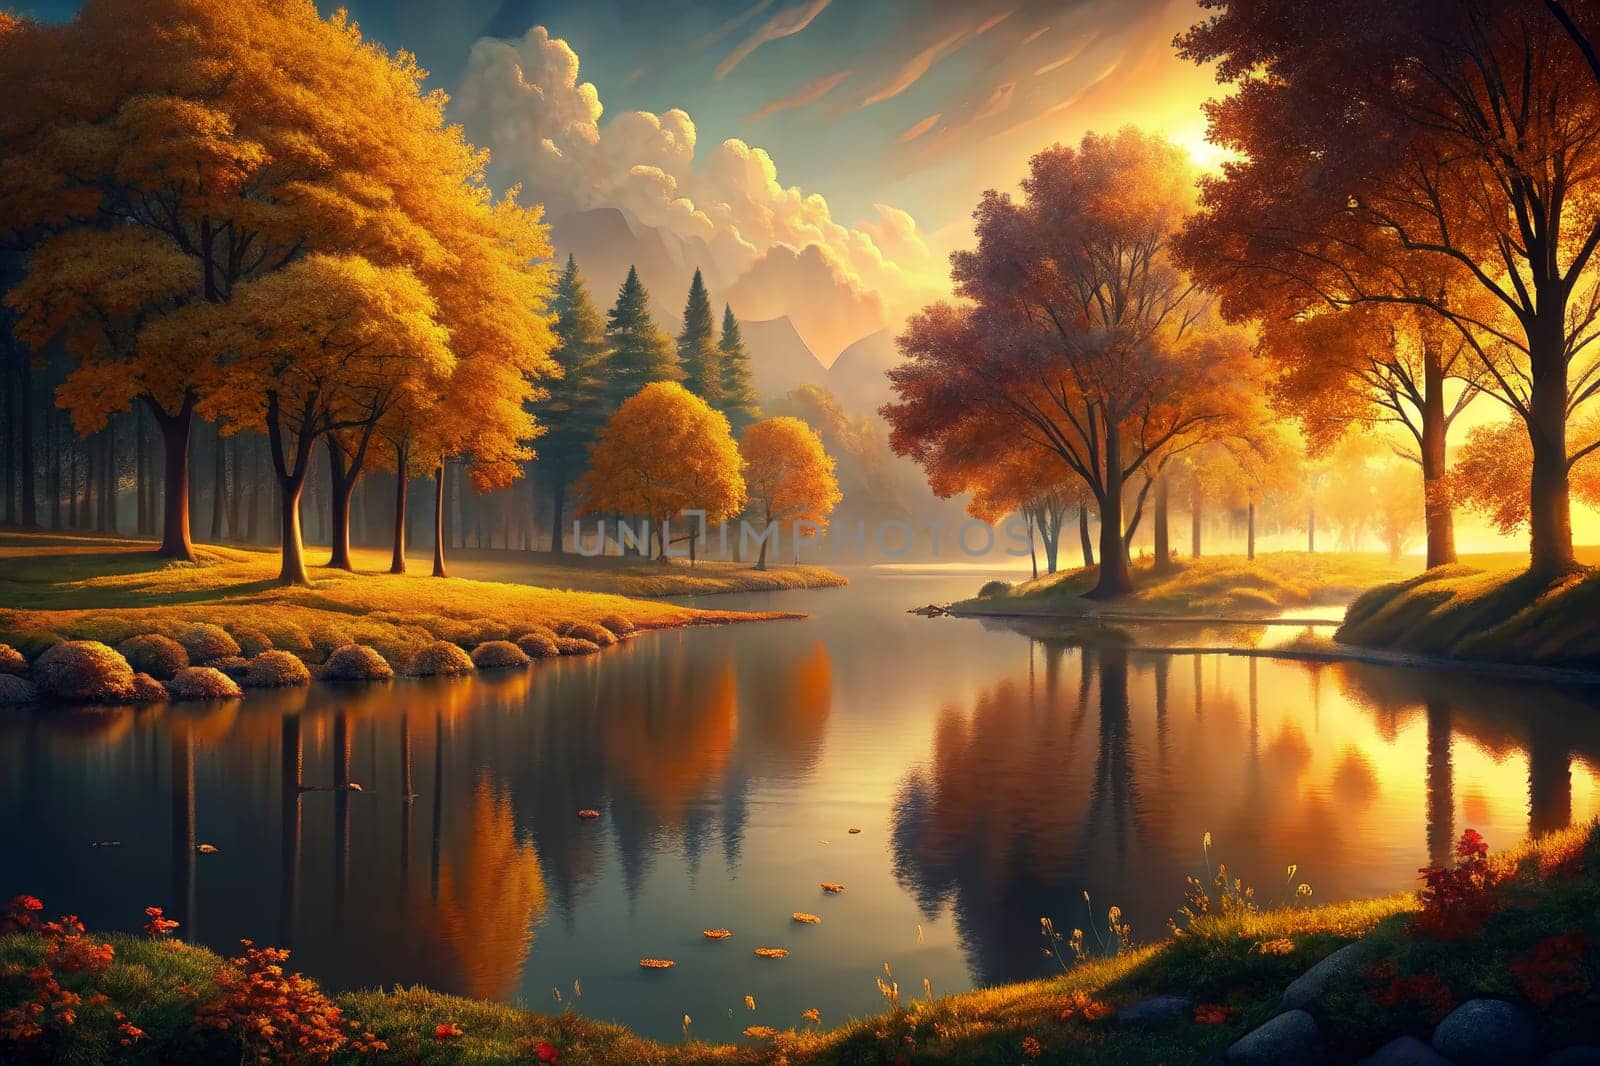 A calm river flows through a tranquil forest at sunset. The trees are adorned with vibrant yellow and orange leaves, casting warm reflections on the water's surface. Sunbeams pierce through the trees, illuminating the scene with a golden glow.